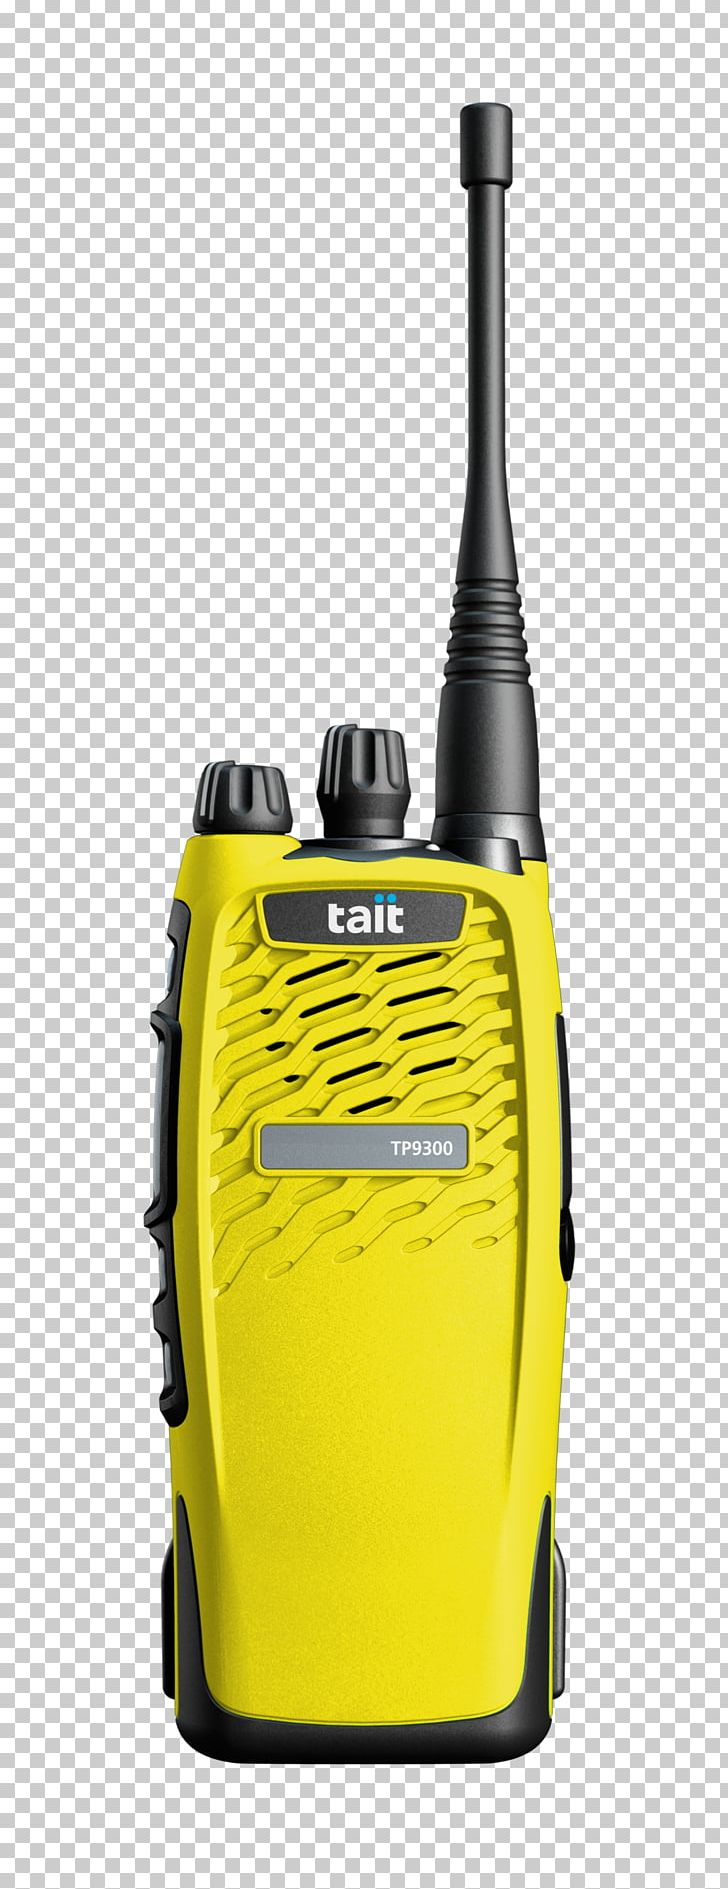 Digital Mobile Radio Tait Communications Project 25 PNG, Clipart, Aerials, Cylinder, Digital Mobile Radio, Digital Radio, Dual Mode Mobile Free PNG Download